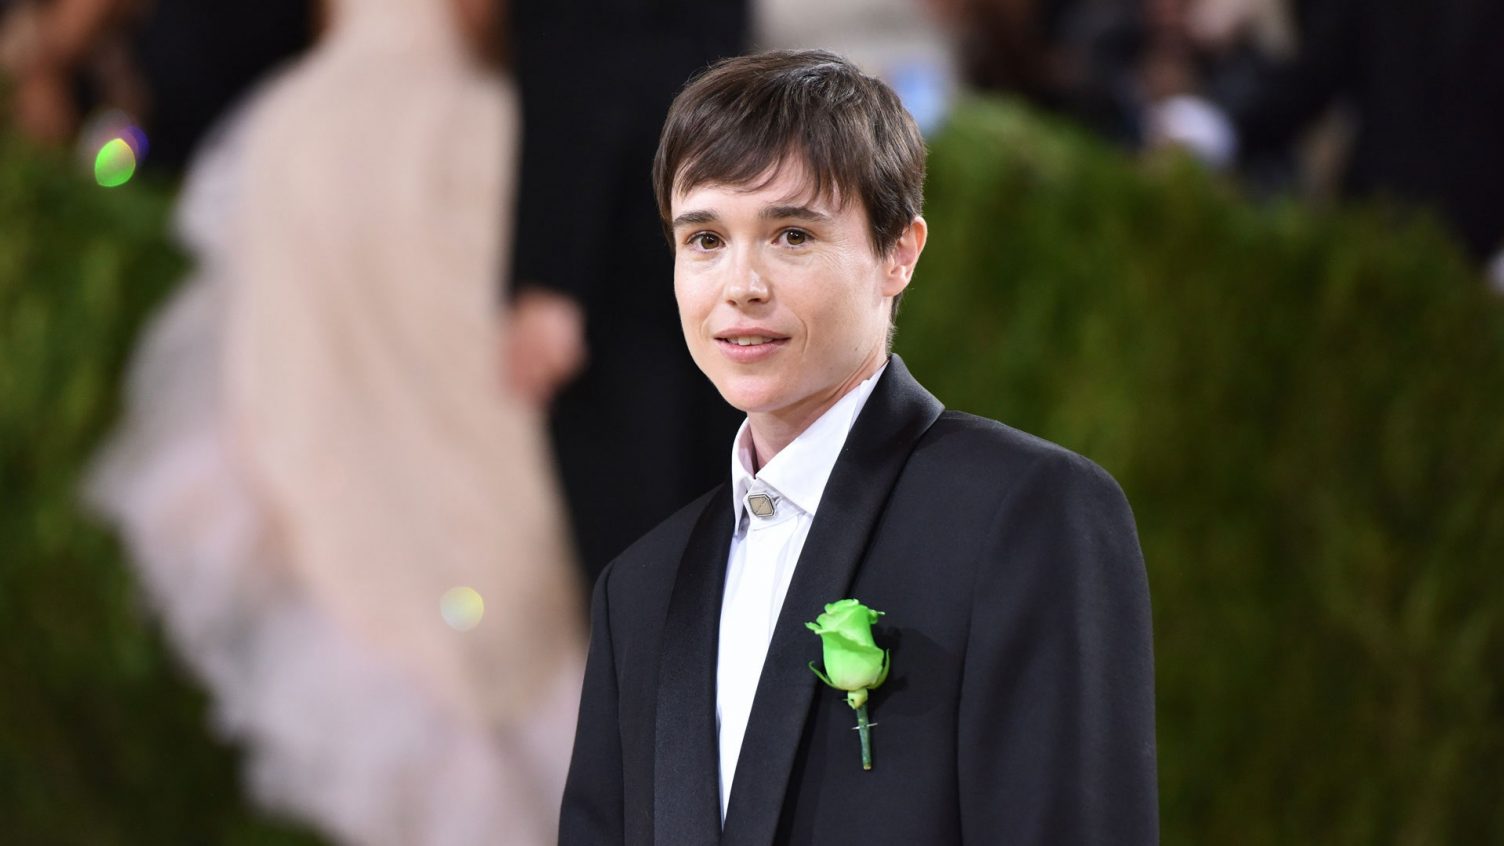 Elliot Page is Queerly Proud of his dress sense at the Met Gala 2021